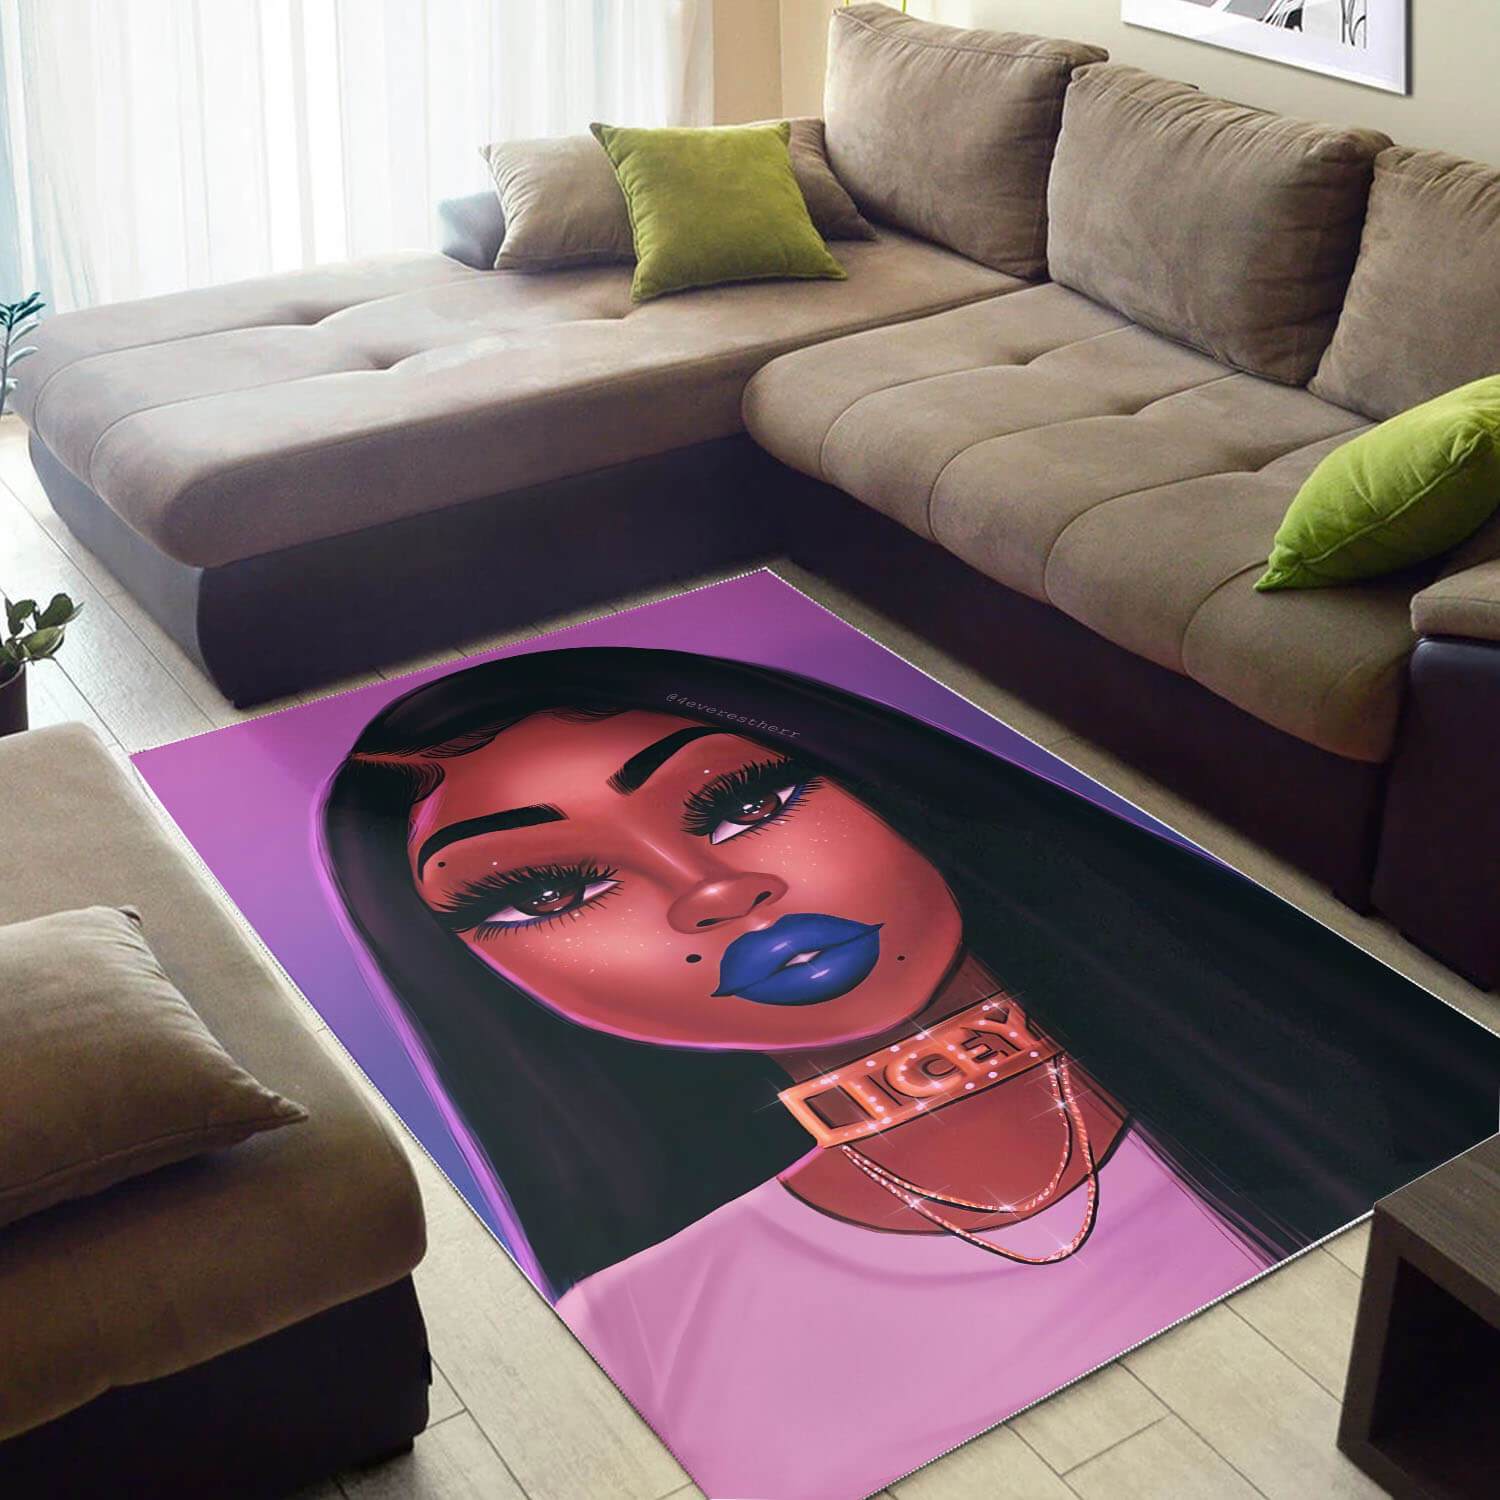 African American Area Rugs Beautiful Melanin Beauty Girl African Inspired Area Rug Afrocentric Home Decor Ideas WBG30225